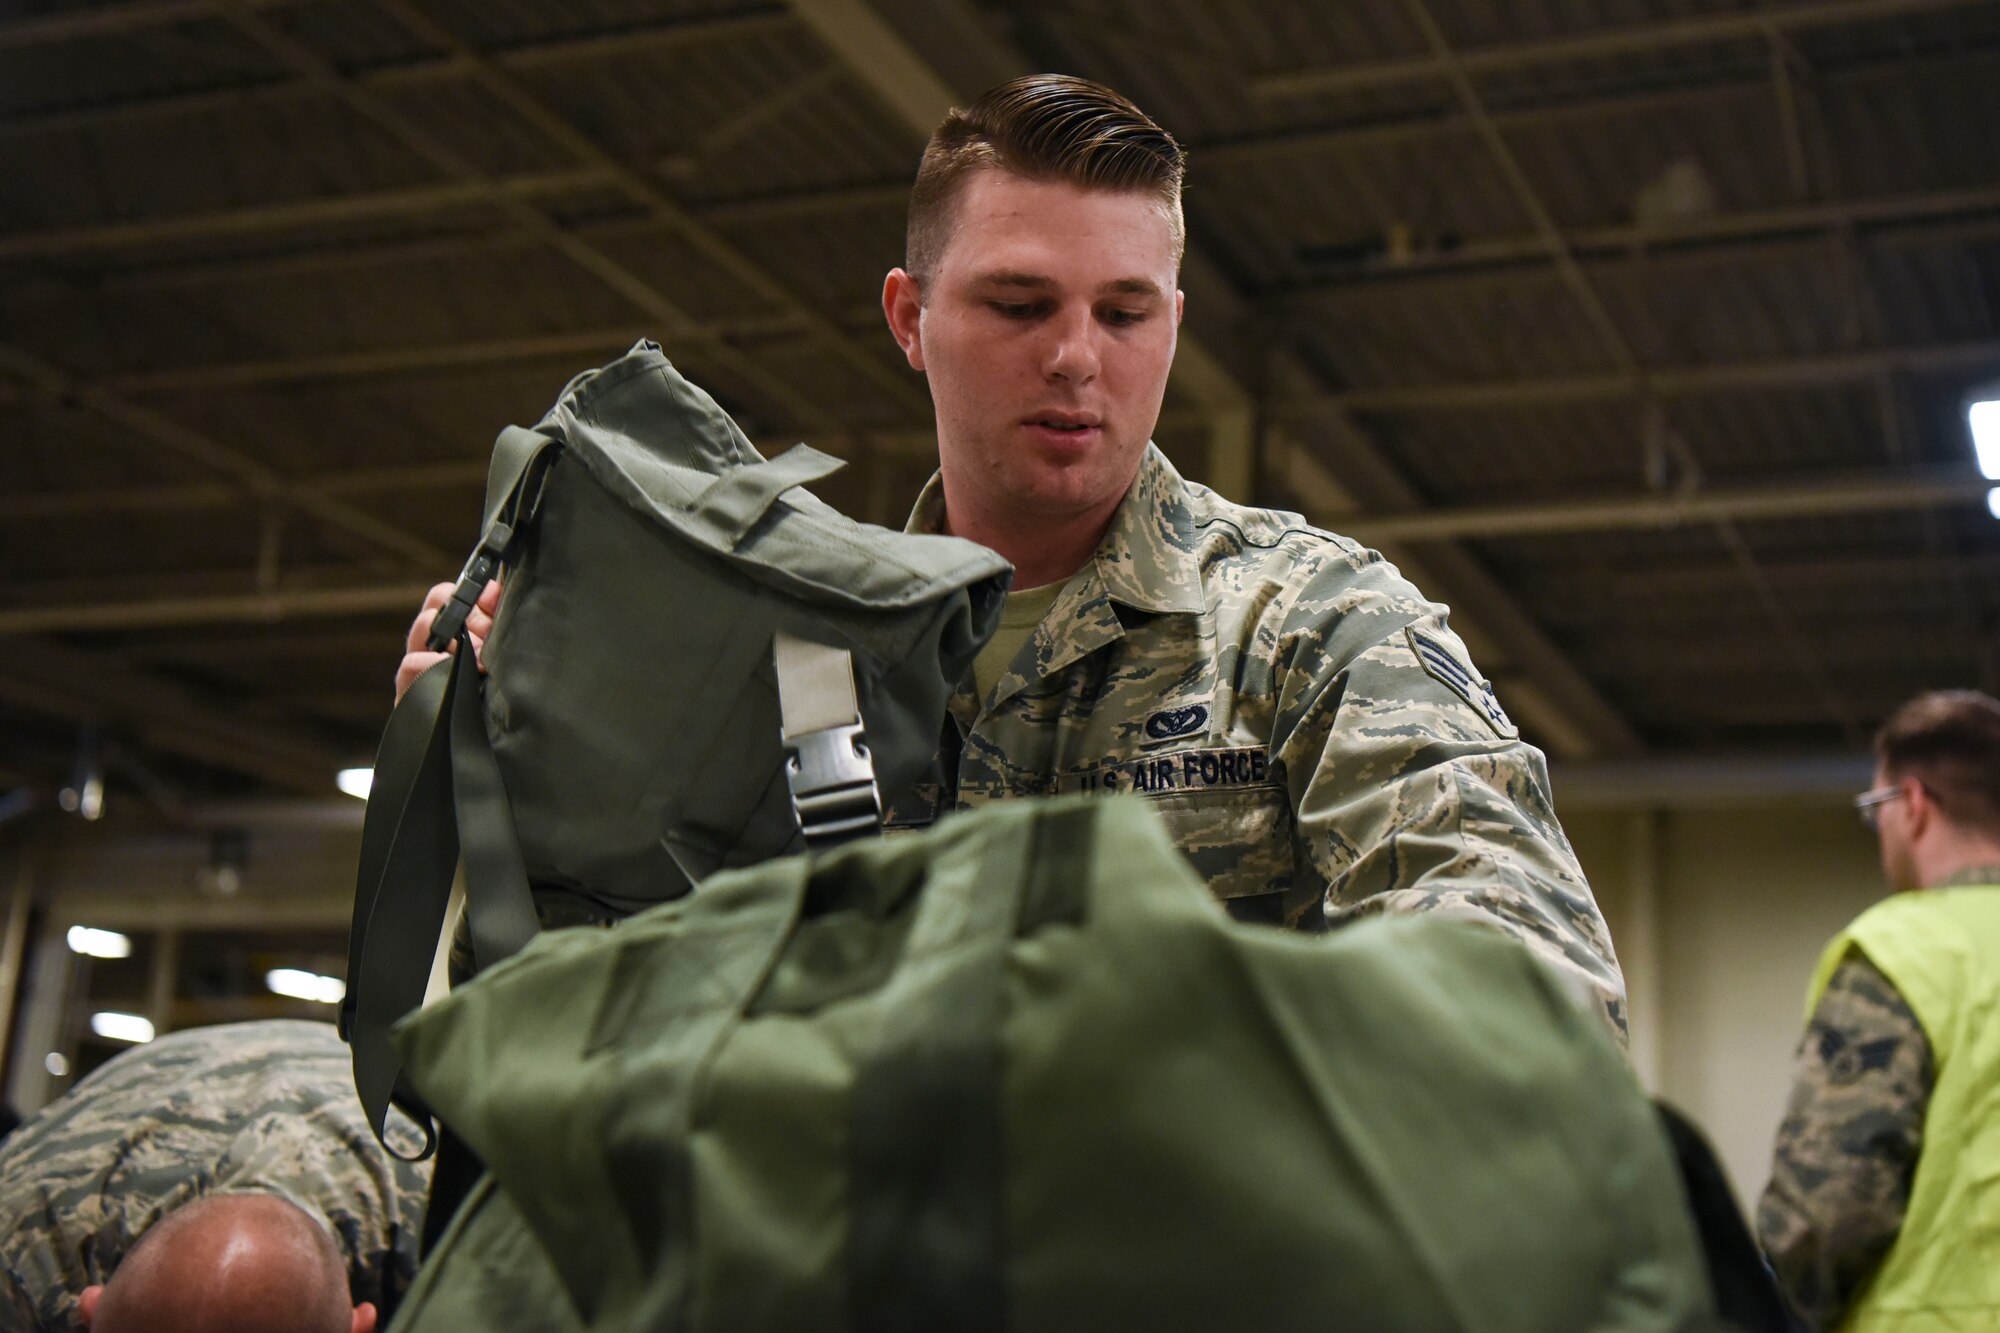 Senior Airman Patrick Archer, a 319th Civil Engineer Squadron pest management journeyman, prepares his bag for a readiness exercise June 14, 2018, on Grand Forks Air Force Base, North Dakota. Archer, along with other Airmen, were given a check list of the necessary items to be fully prepared for the exercise. (U.S. Air Force photo by Airman 1st Class Melody K. Wolff)